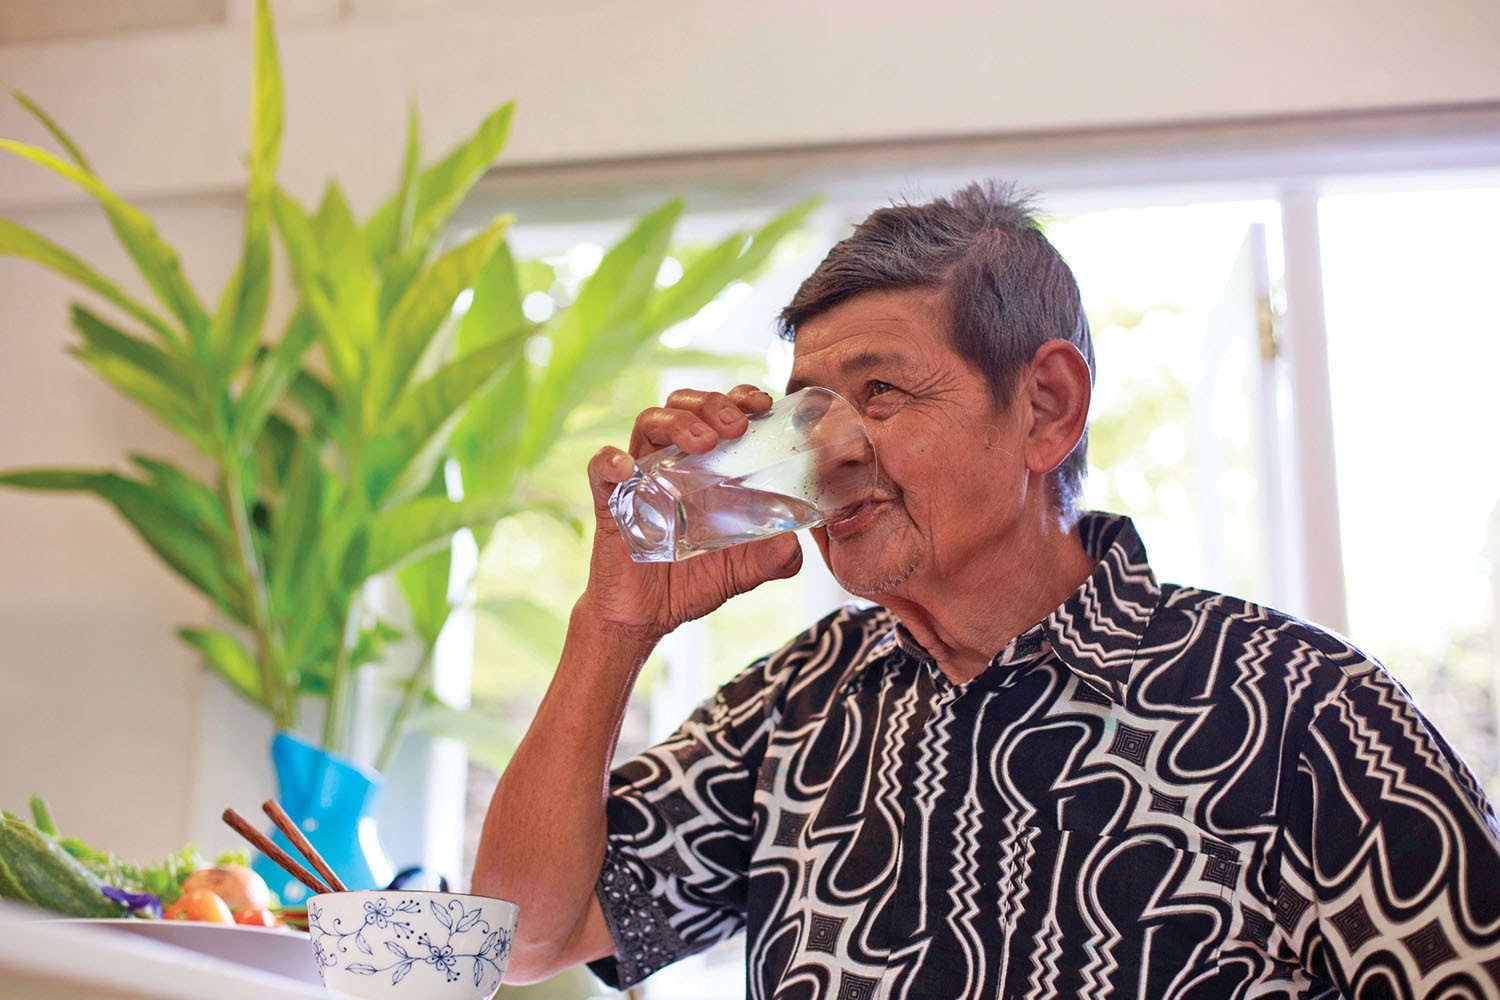 photo of a man drinking from a large glass of water